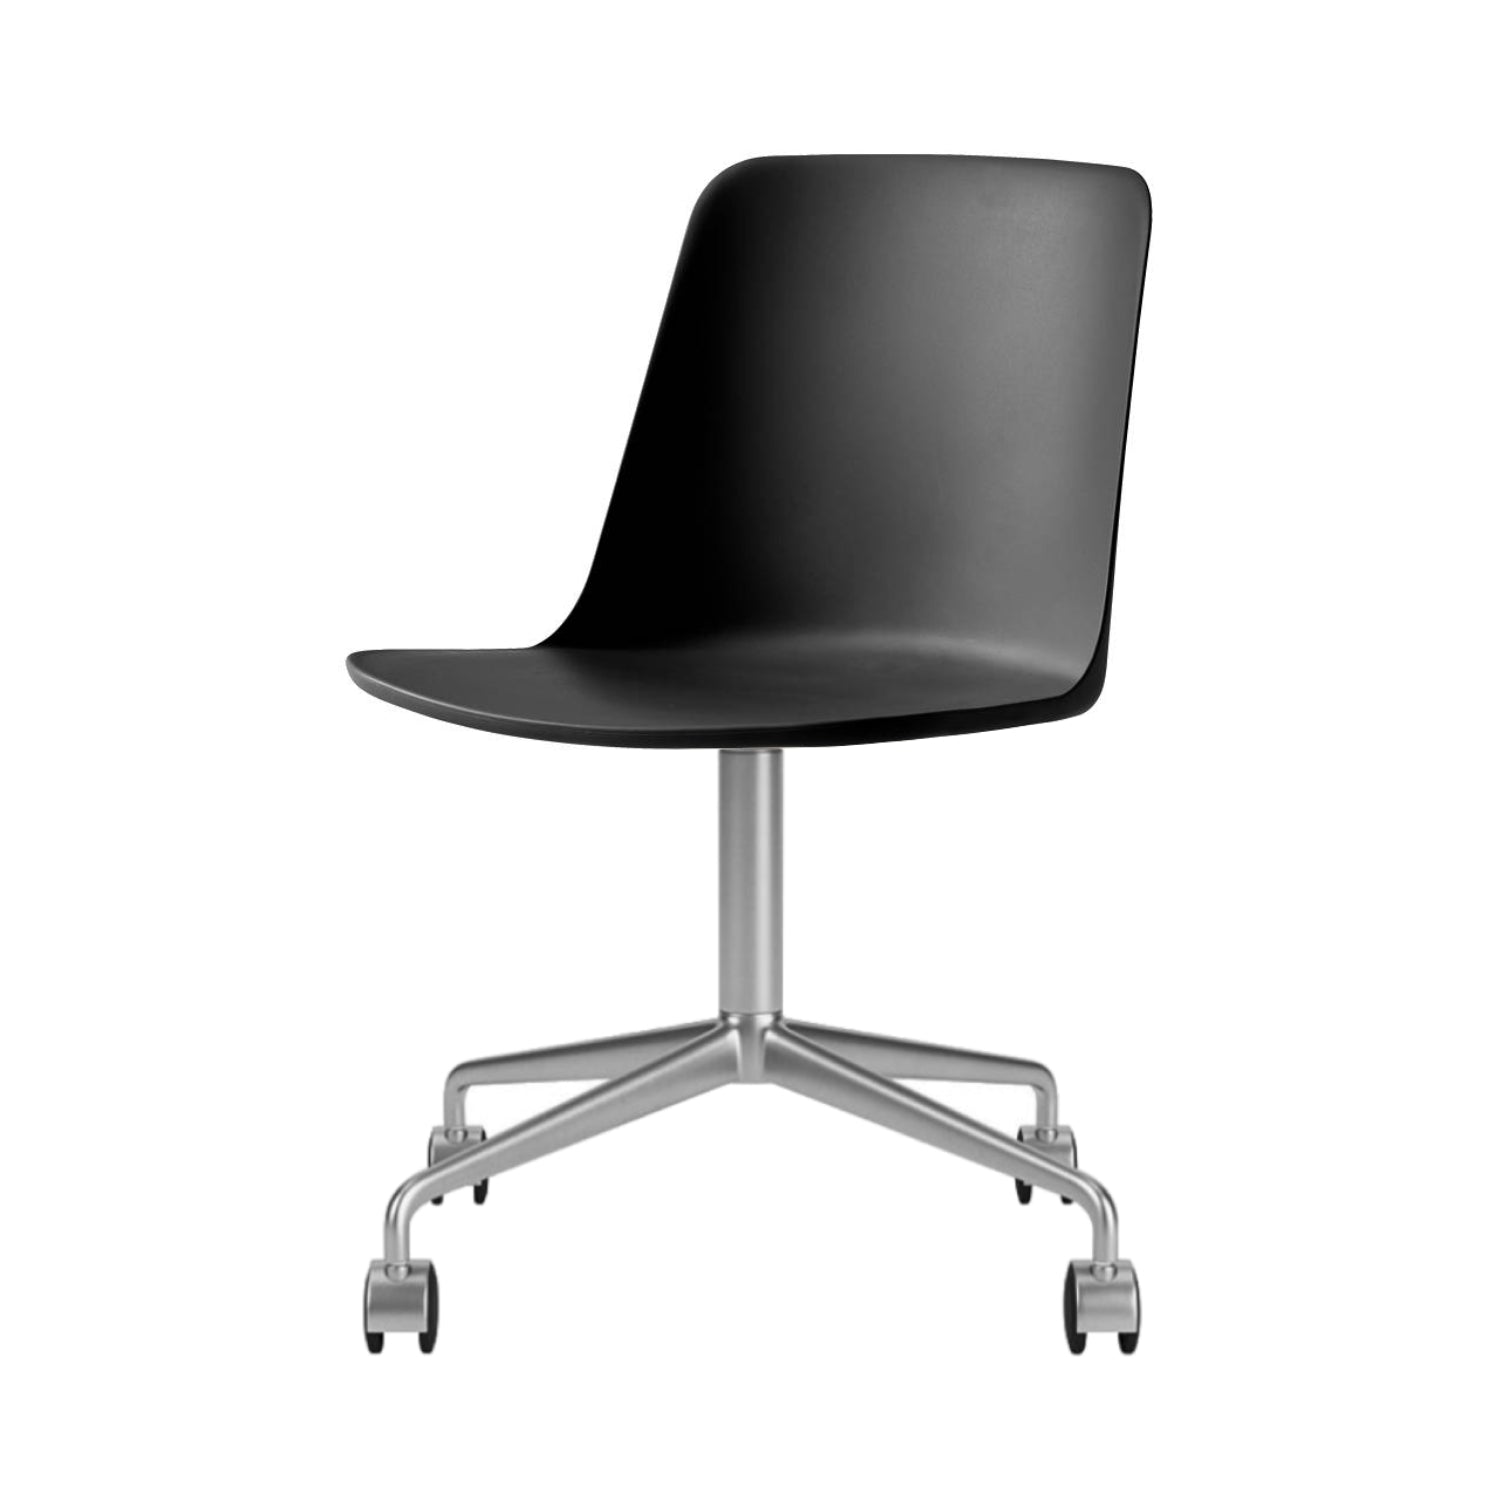 Rely Chair HW21: Black + Polished Aluminum